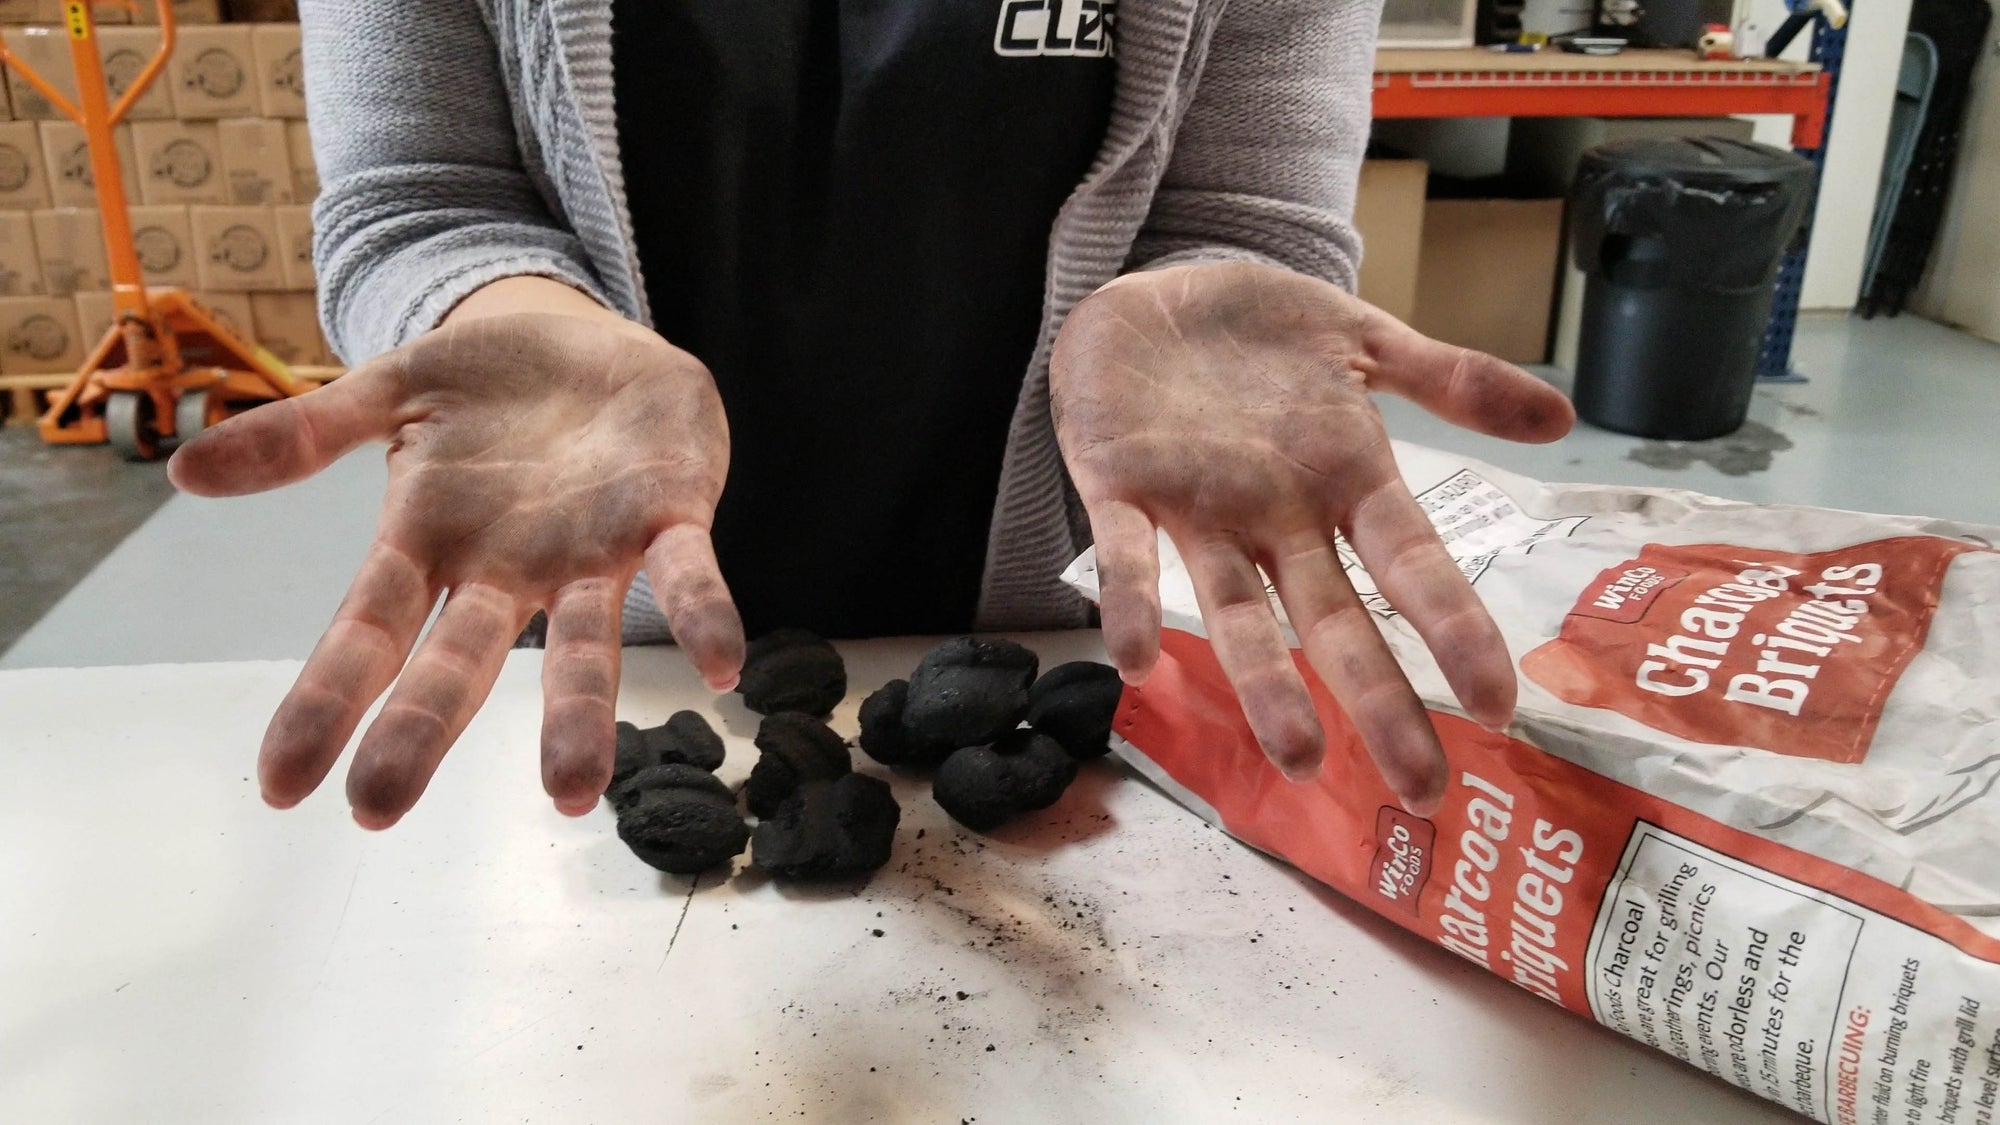 Removing Charcoal From your hands